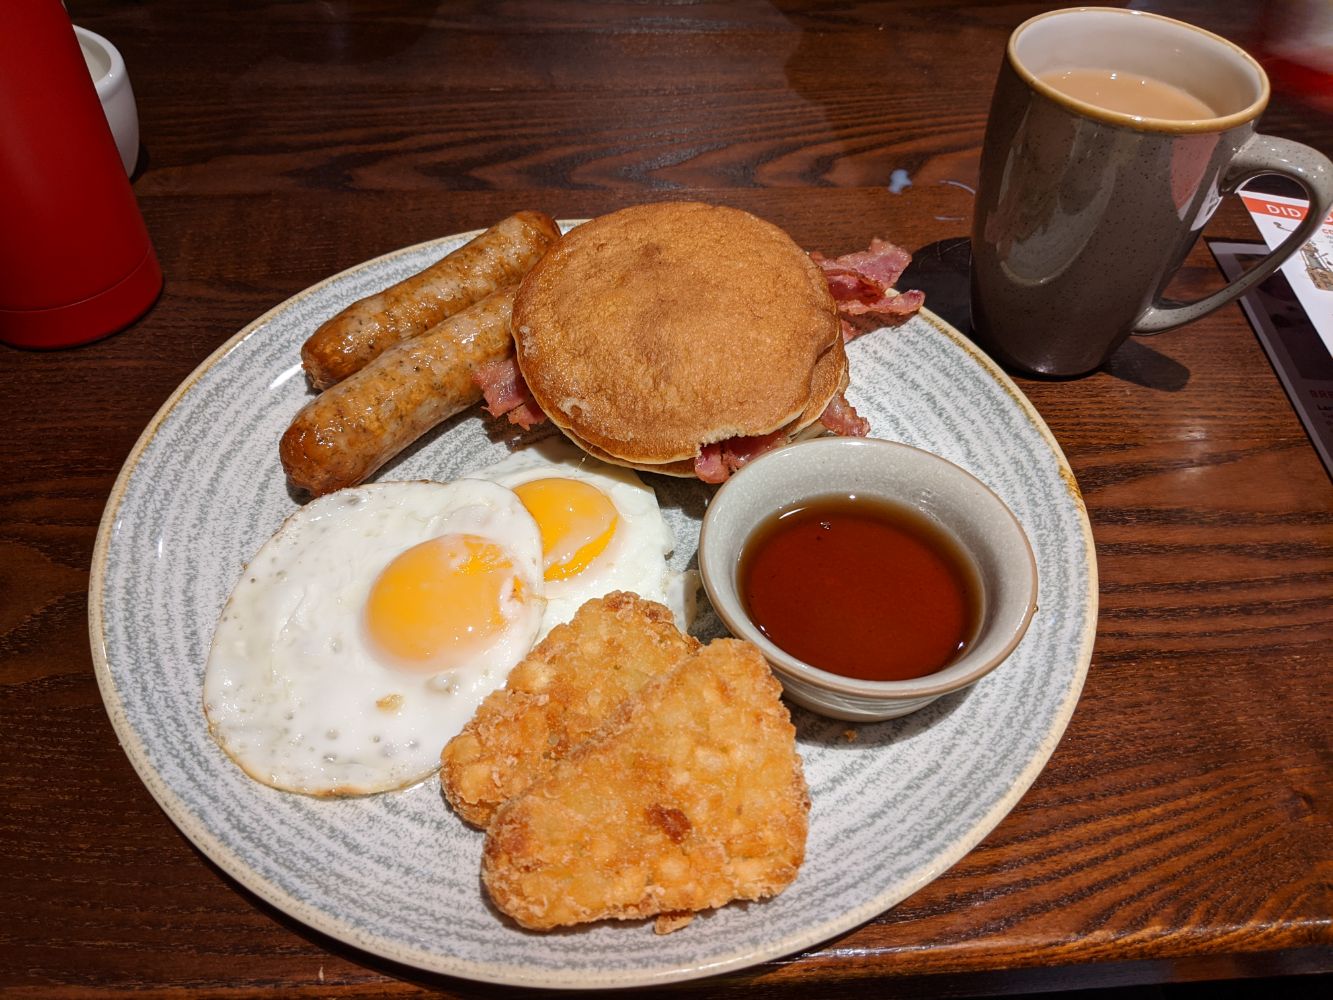 An "American breakfast" with bacon, sausages and pancakes